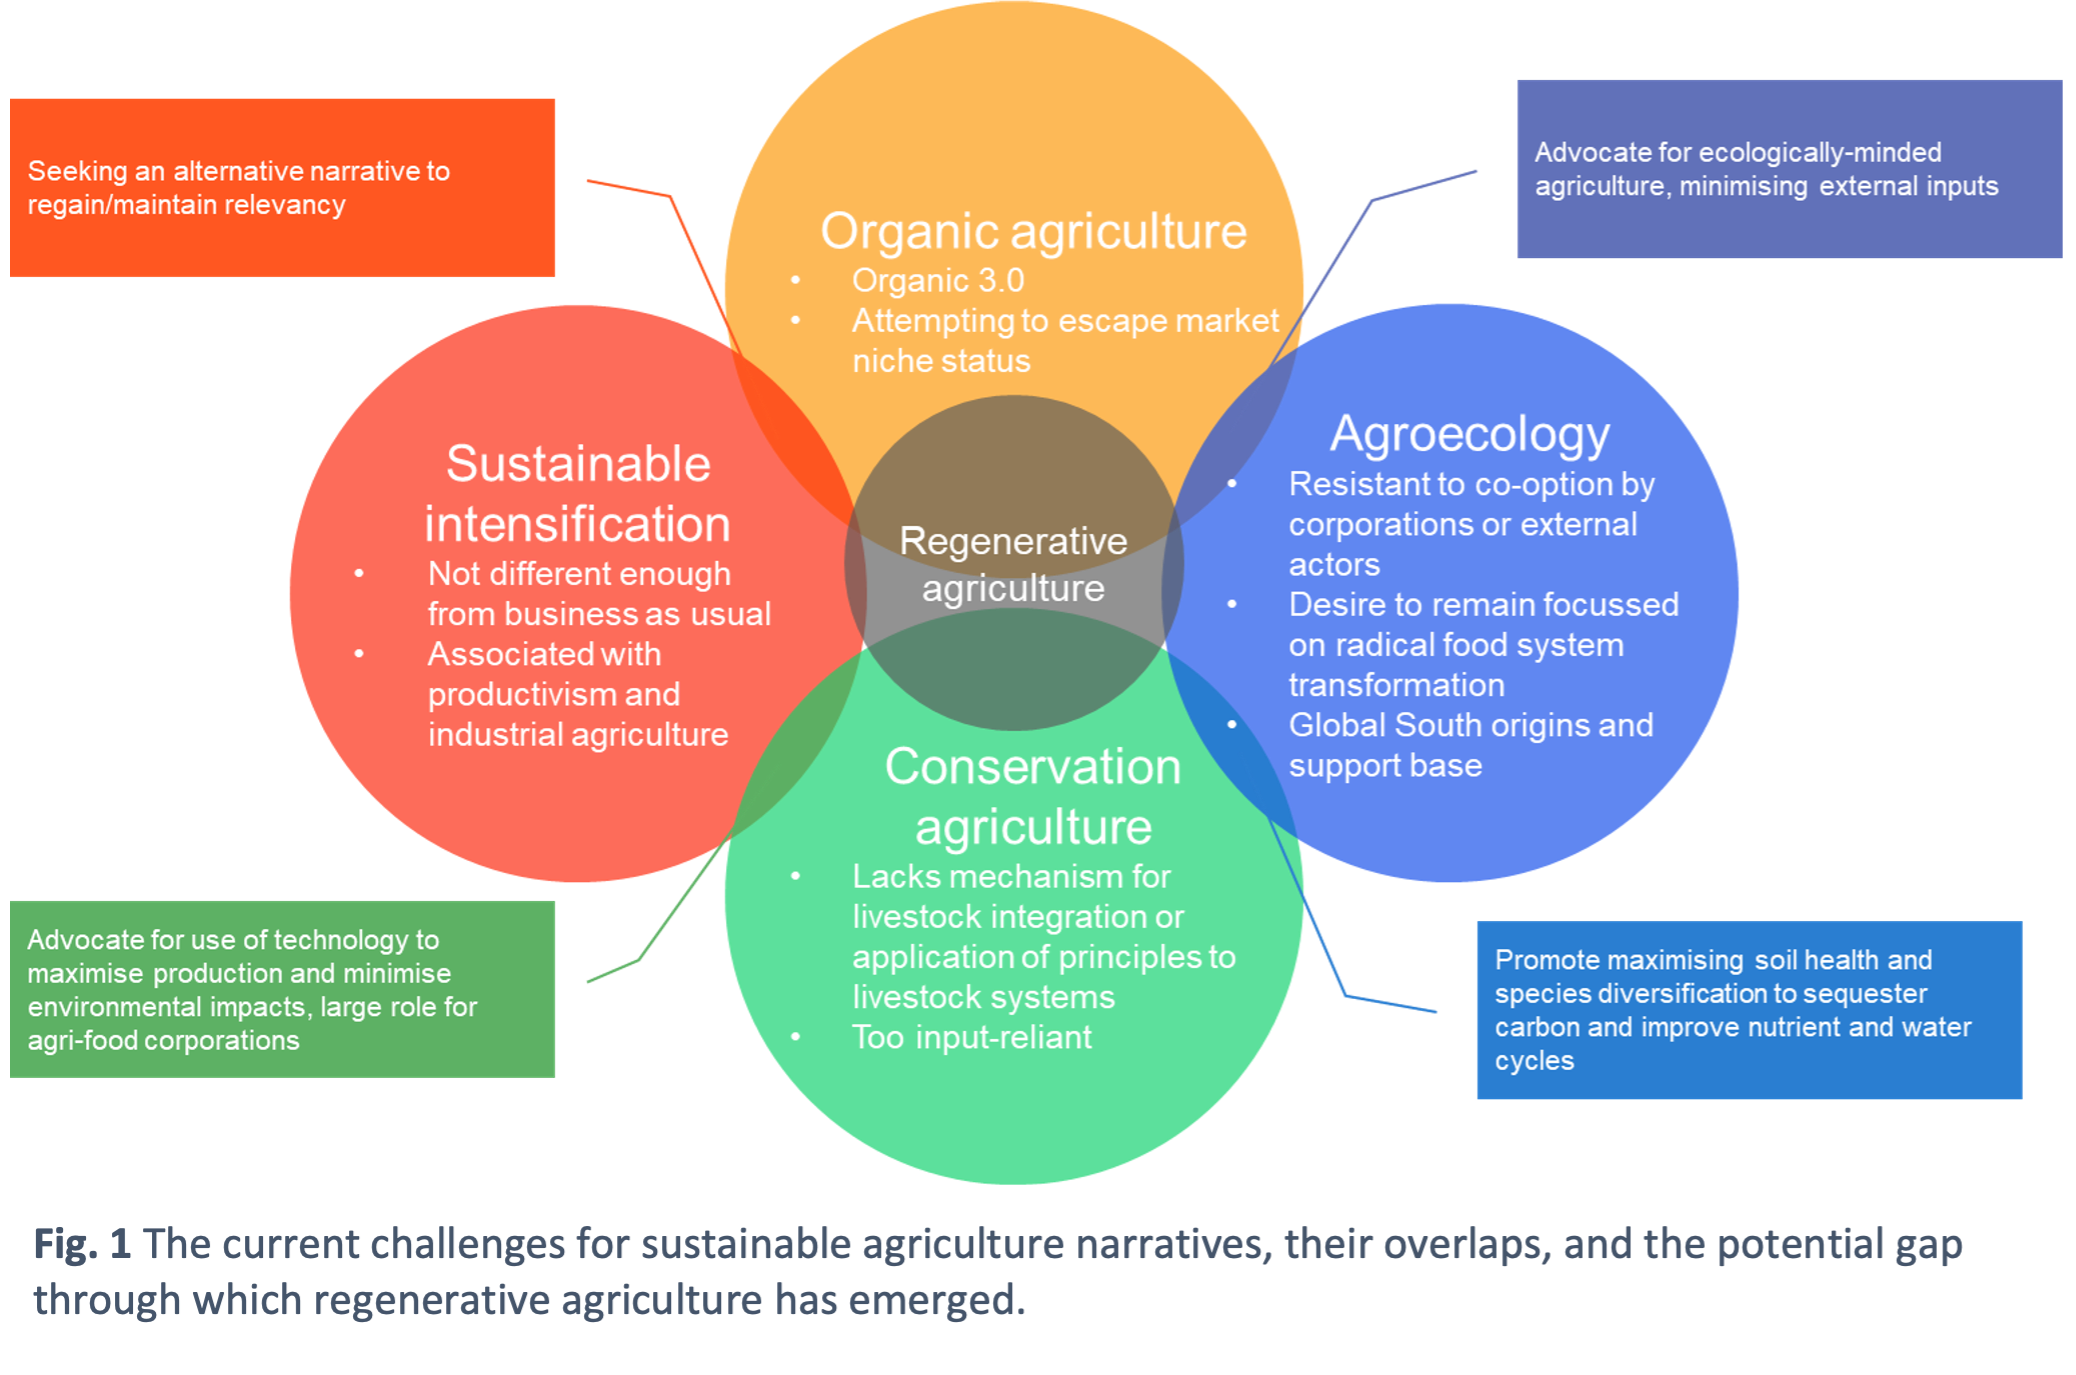 Fig. 1 The current challenges for sustainable agriculture narratives, their overlaps, and the potential gap through which regenerative agriculture has emerged.